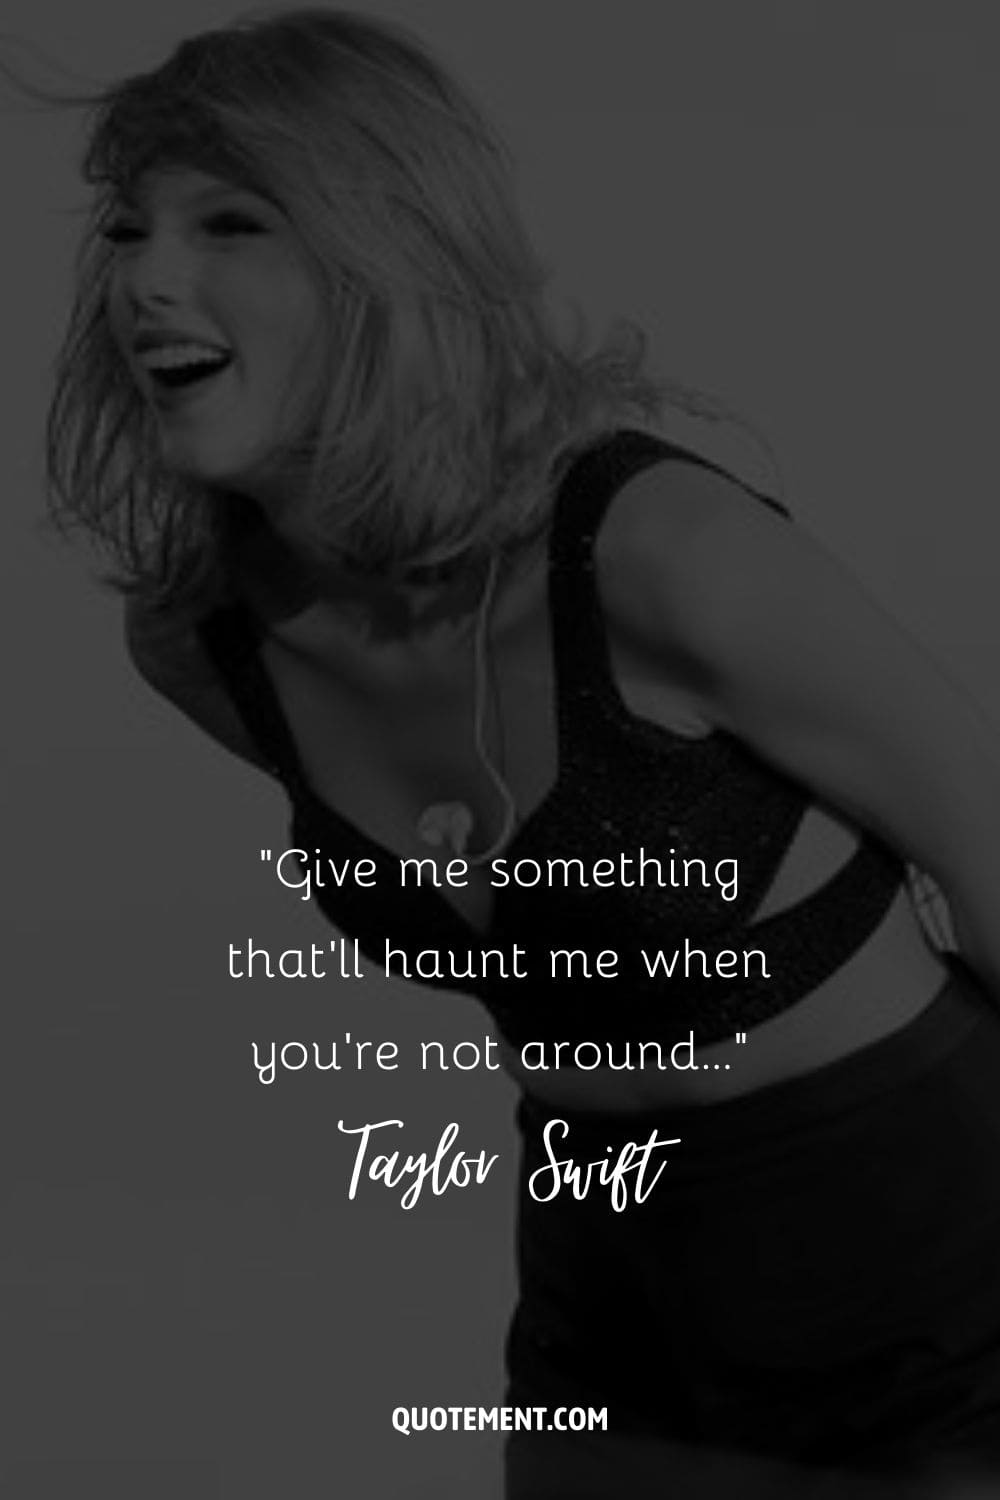 “Give me something that'll haunt me when you're not around...” ― Taylor Swift